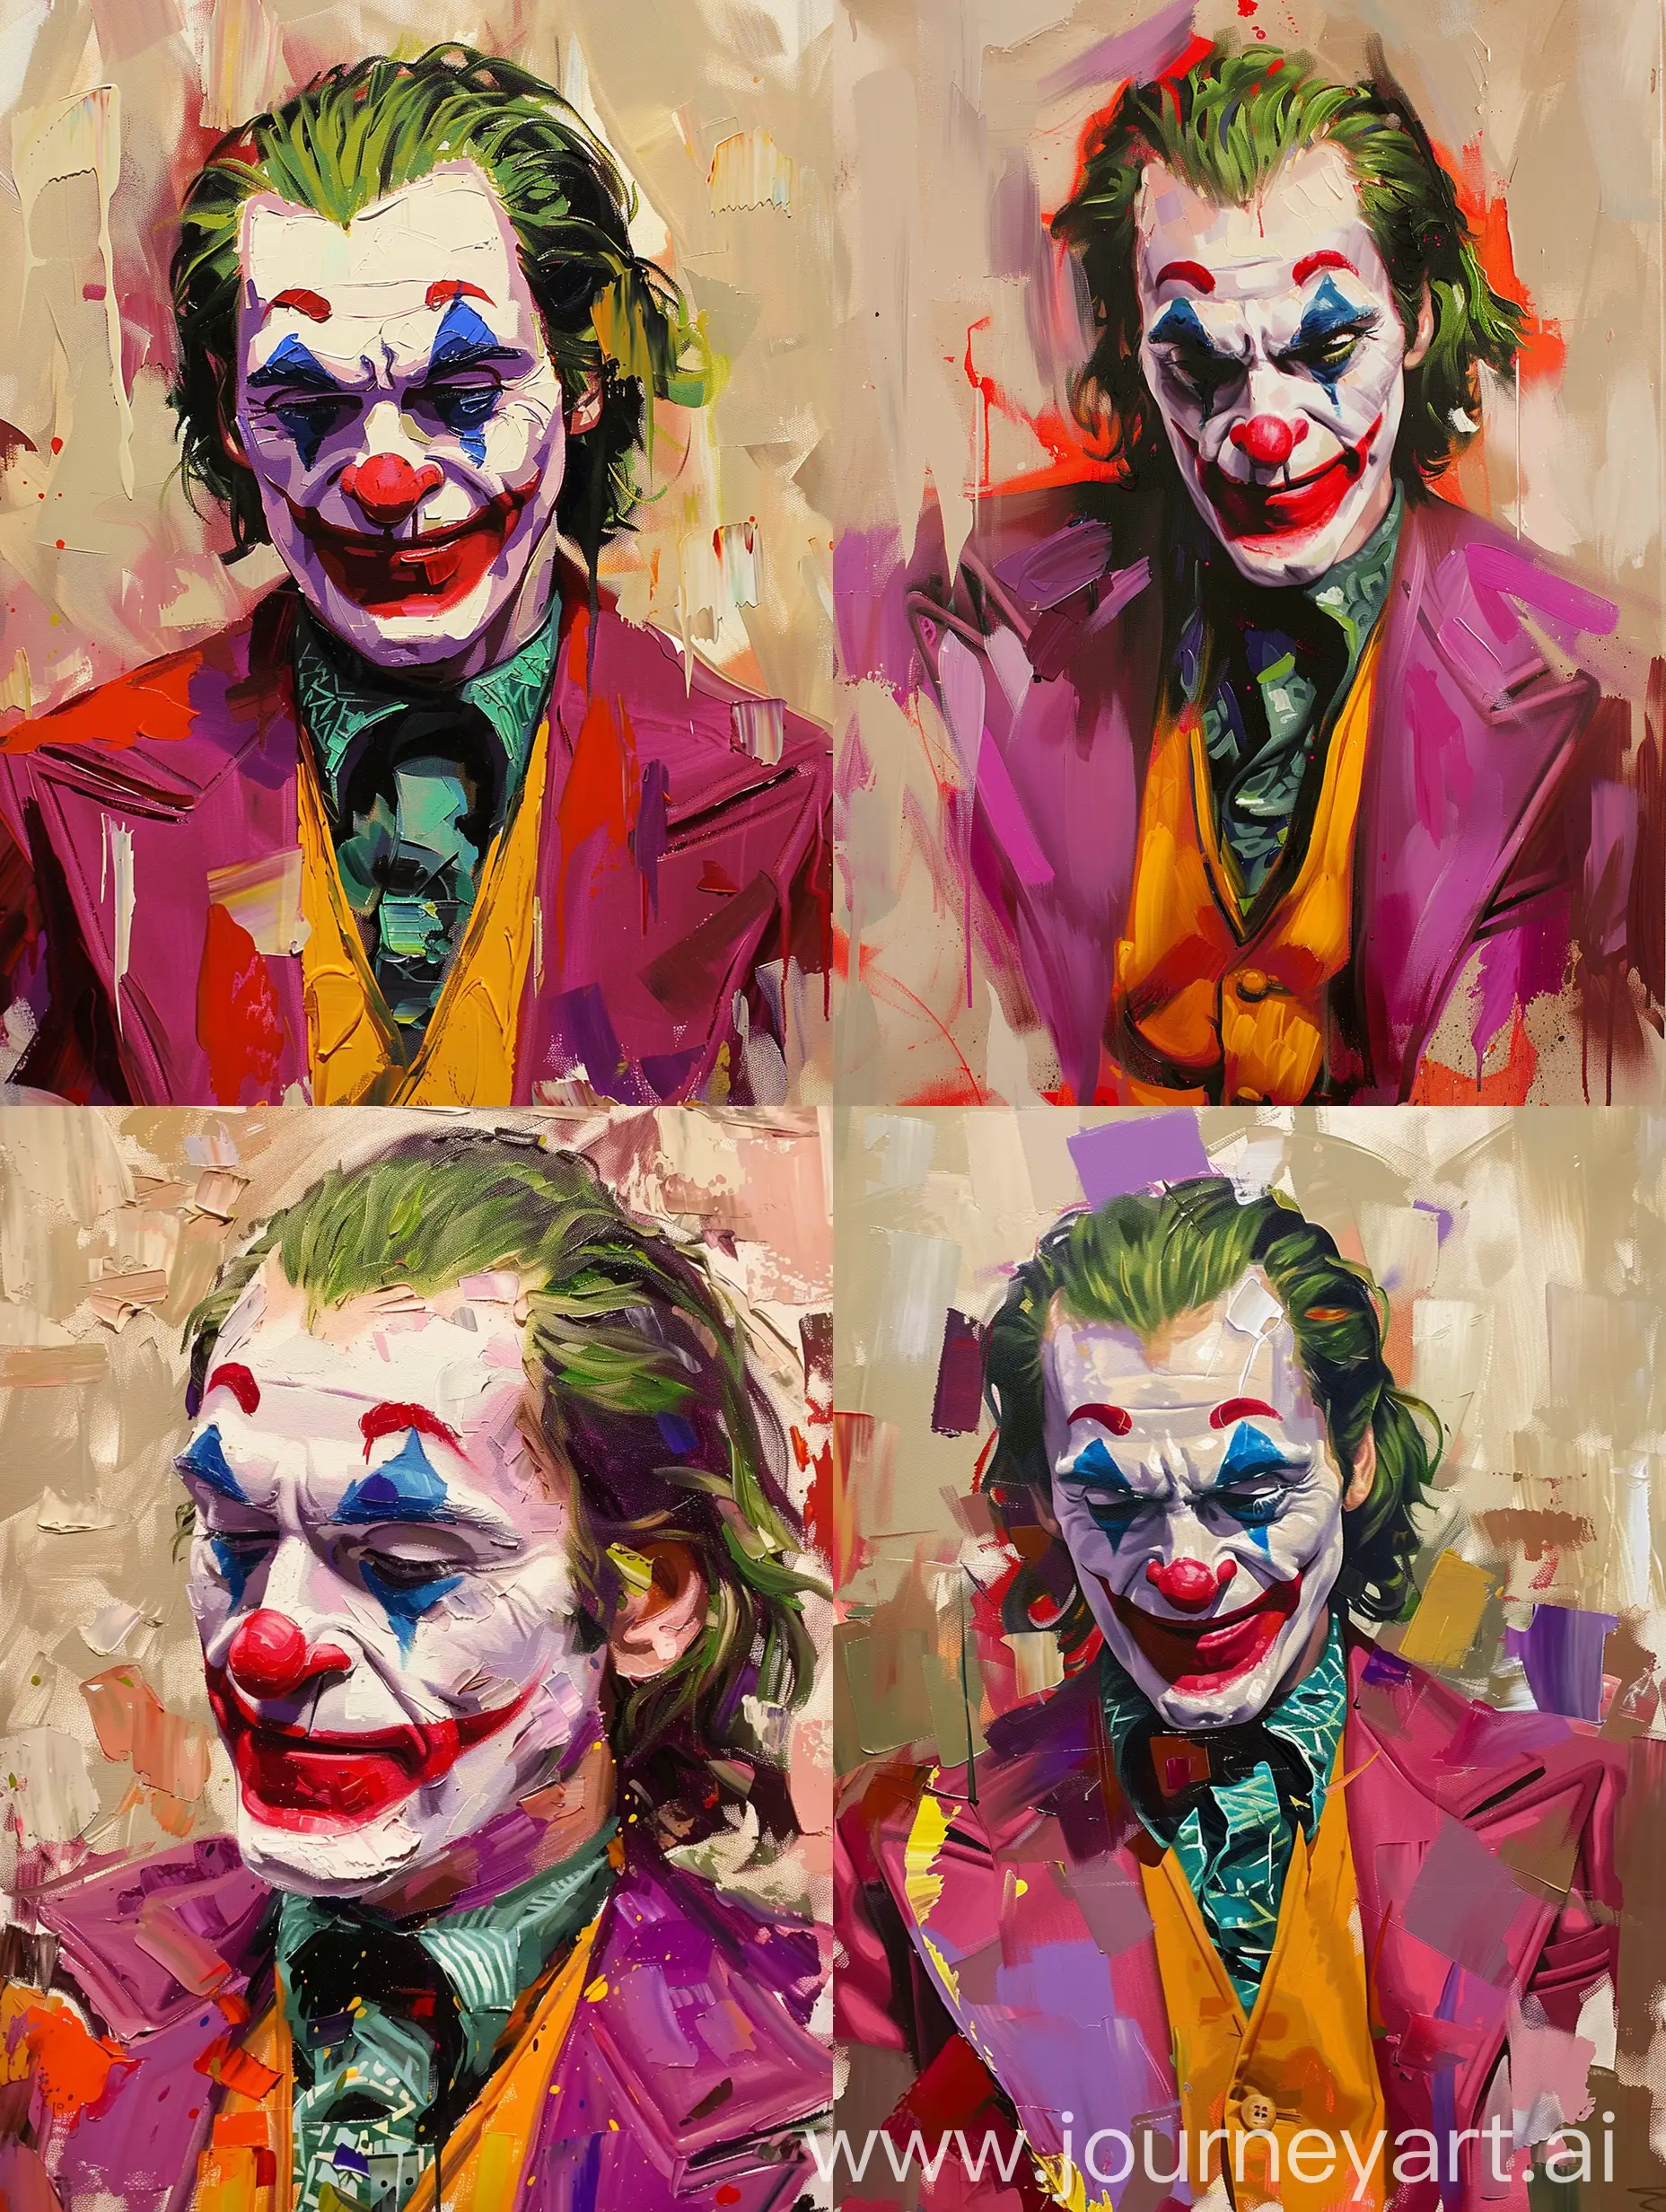 oil painting of the joker in star wars style with bright colors like bright red, purple, pink, yellow beige